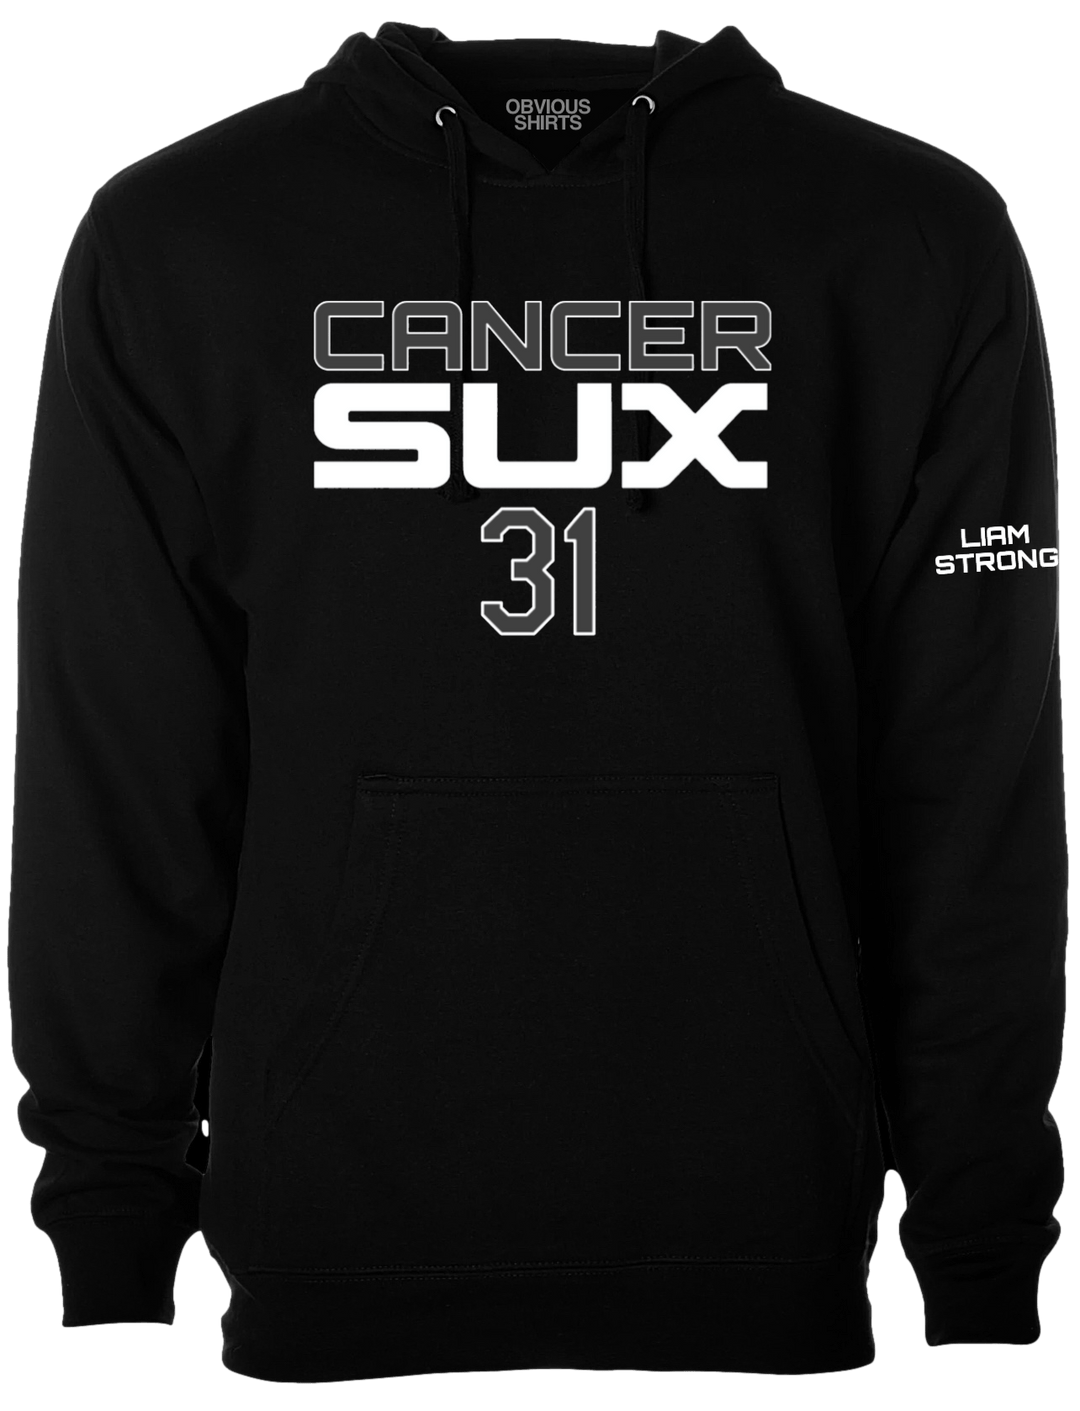 CANCER SUX. LIAM STRONG. (HOODED SWEATSHIRT) - OBVIOUS SHIRTS